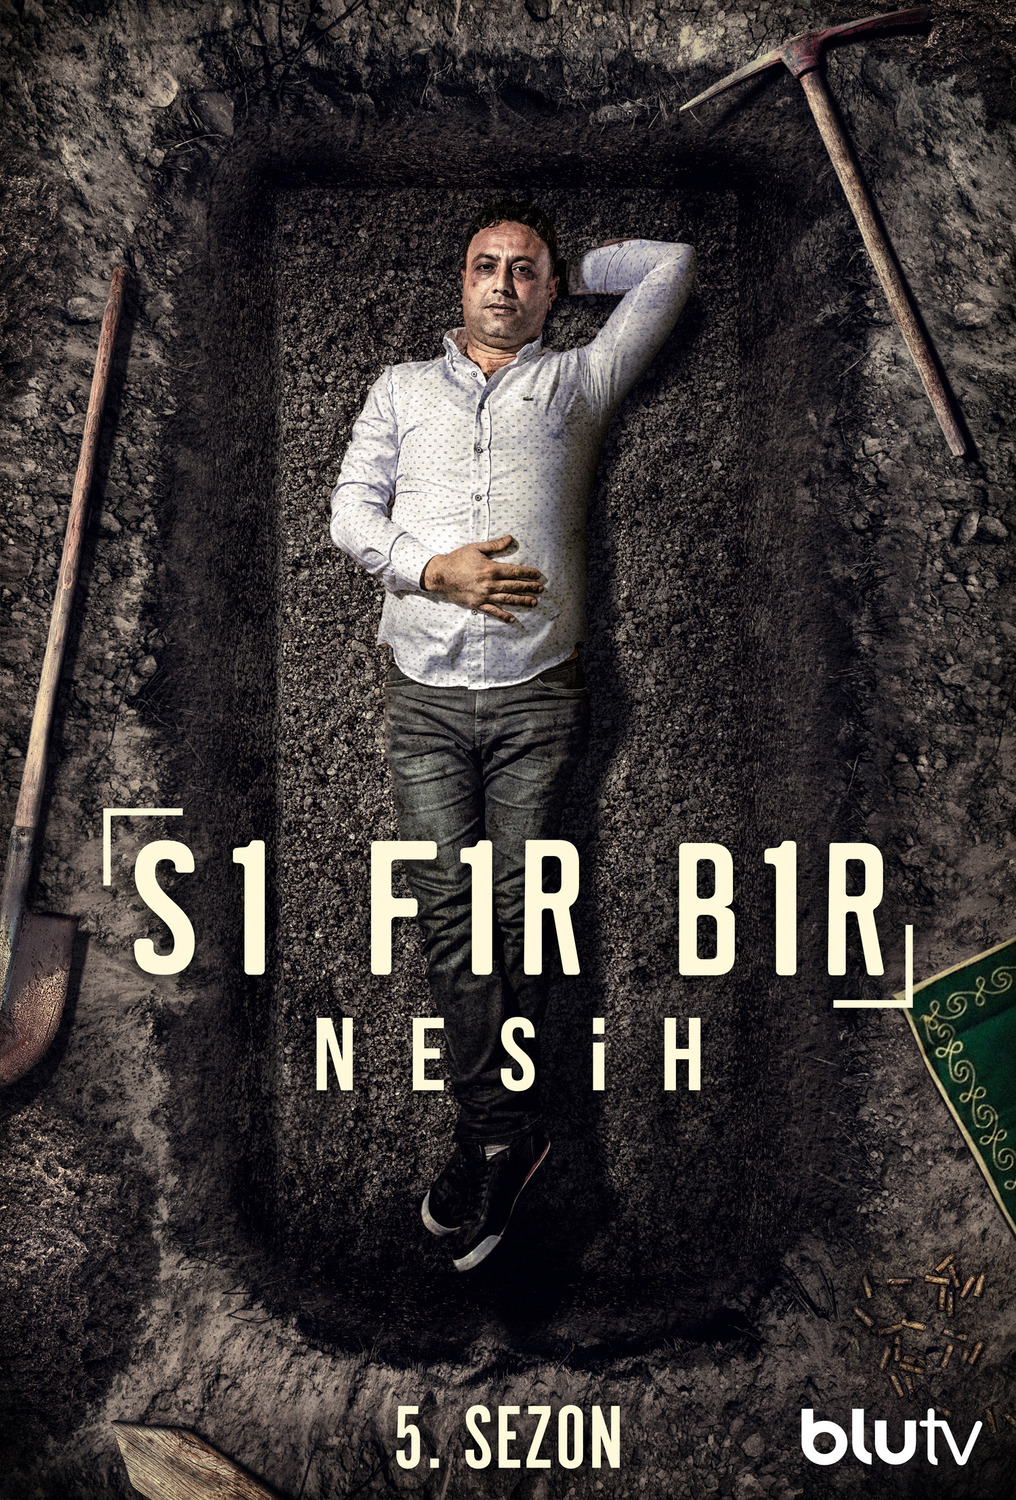 Extra Large TV Poster Image for Sifir Bir (#17 of 23)